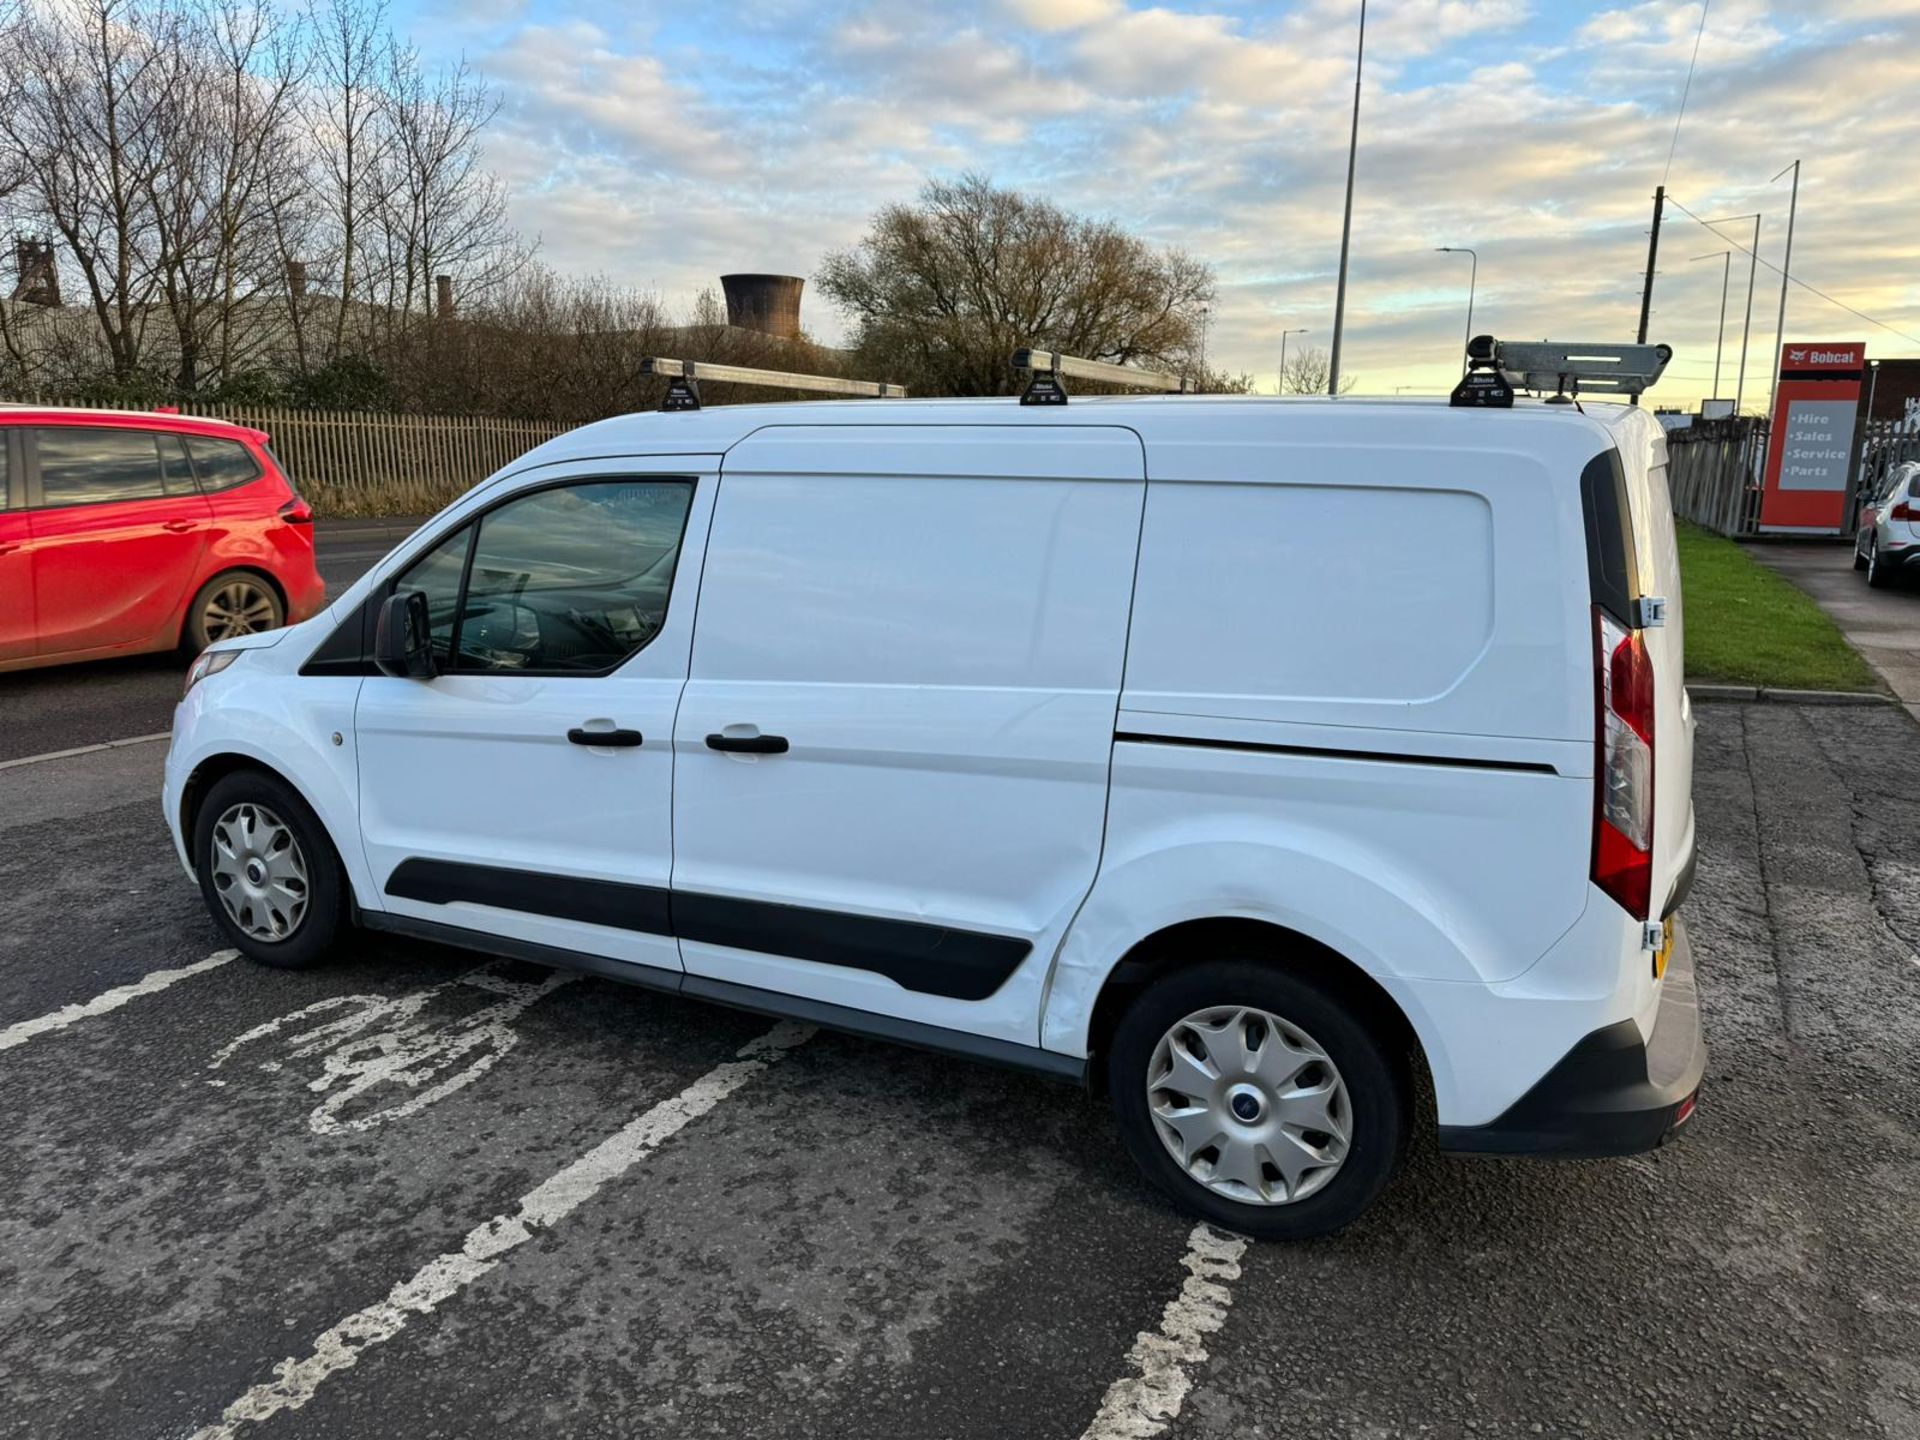 2018 18 FORD TRANSIT CONNECT TREND PAENL VAN - 128K MILES - EURO 6 - 3 SEATS - LWB - ROOF RACK. - Image 5 of 11